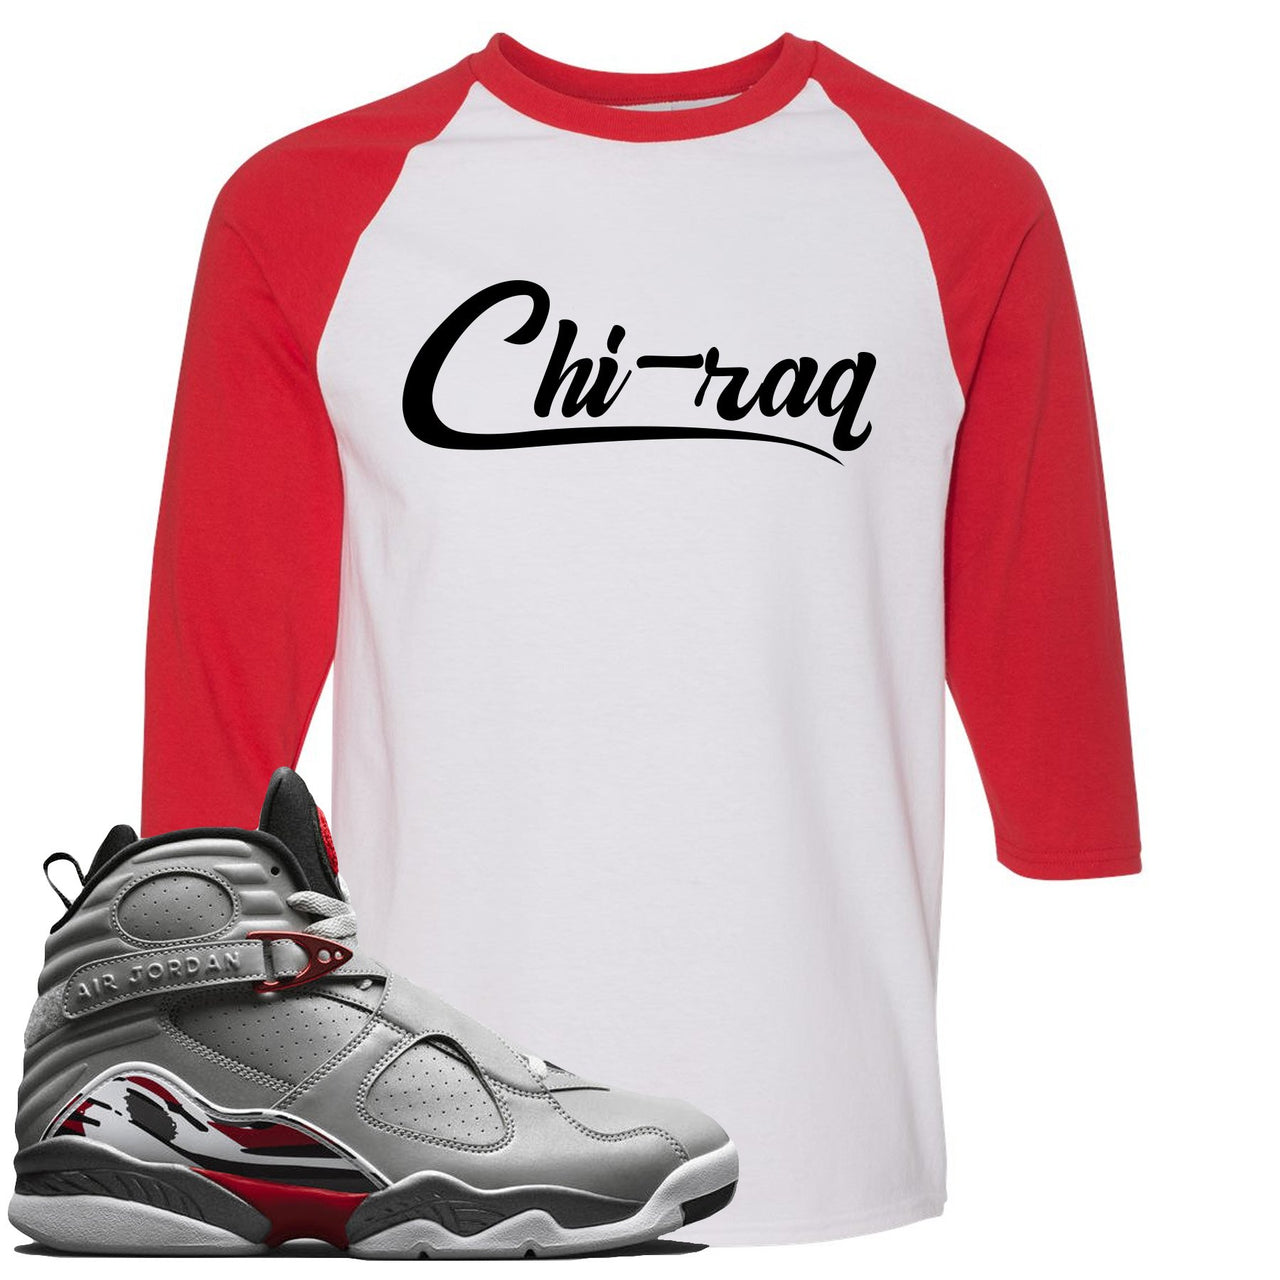 Reflections of a Champion 8s Raglan T Shirt | Chiraq Script, White and Red